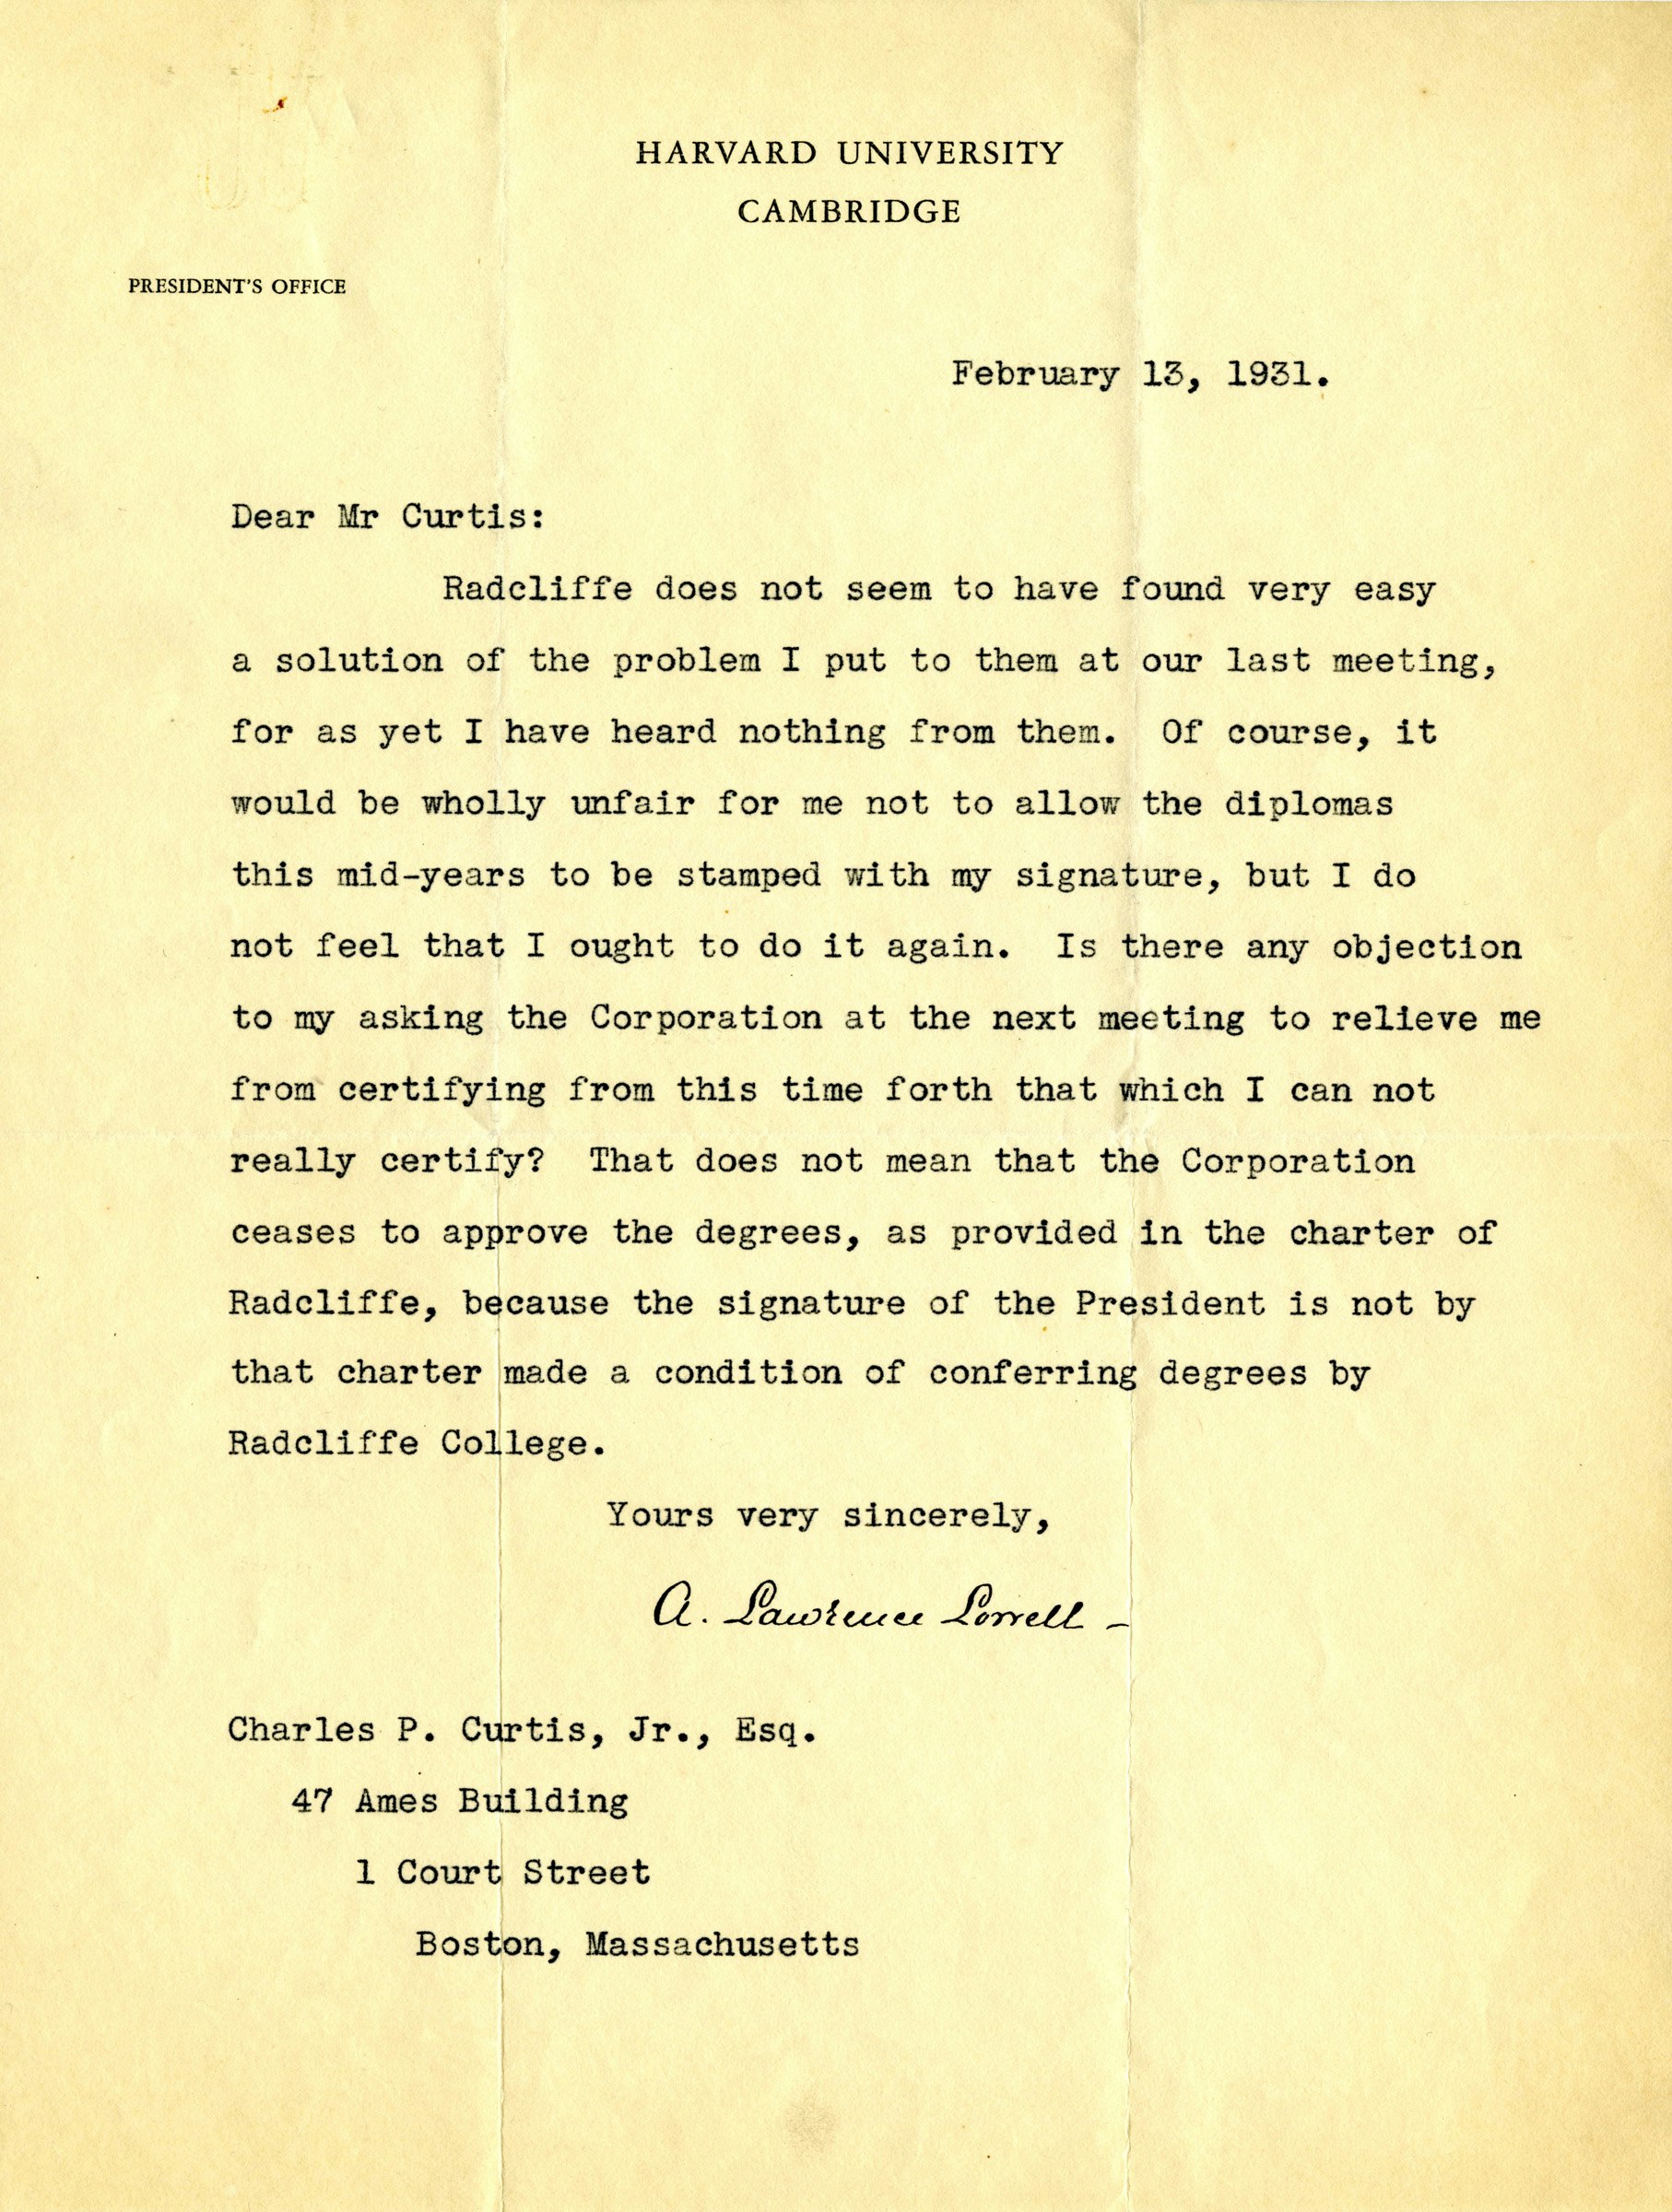 Letter from President A. Lawrence Lowell